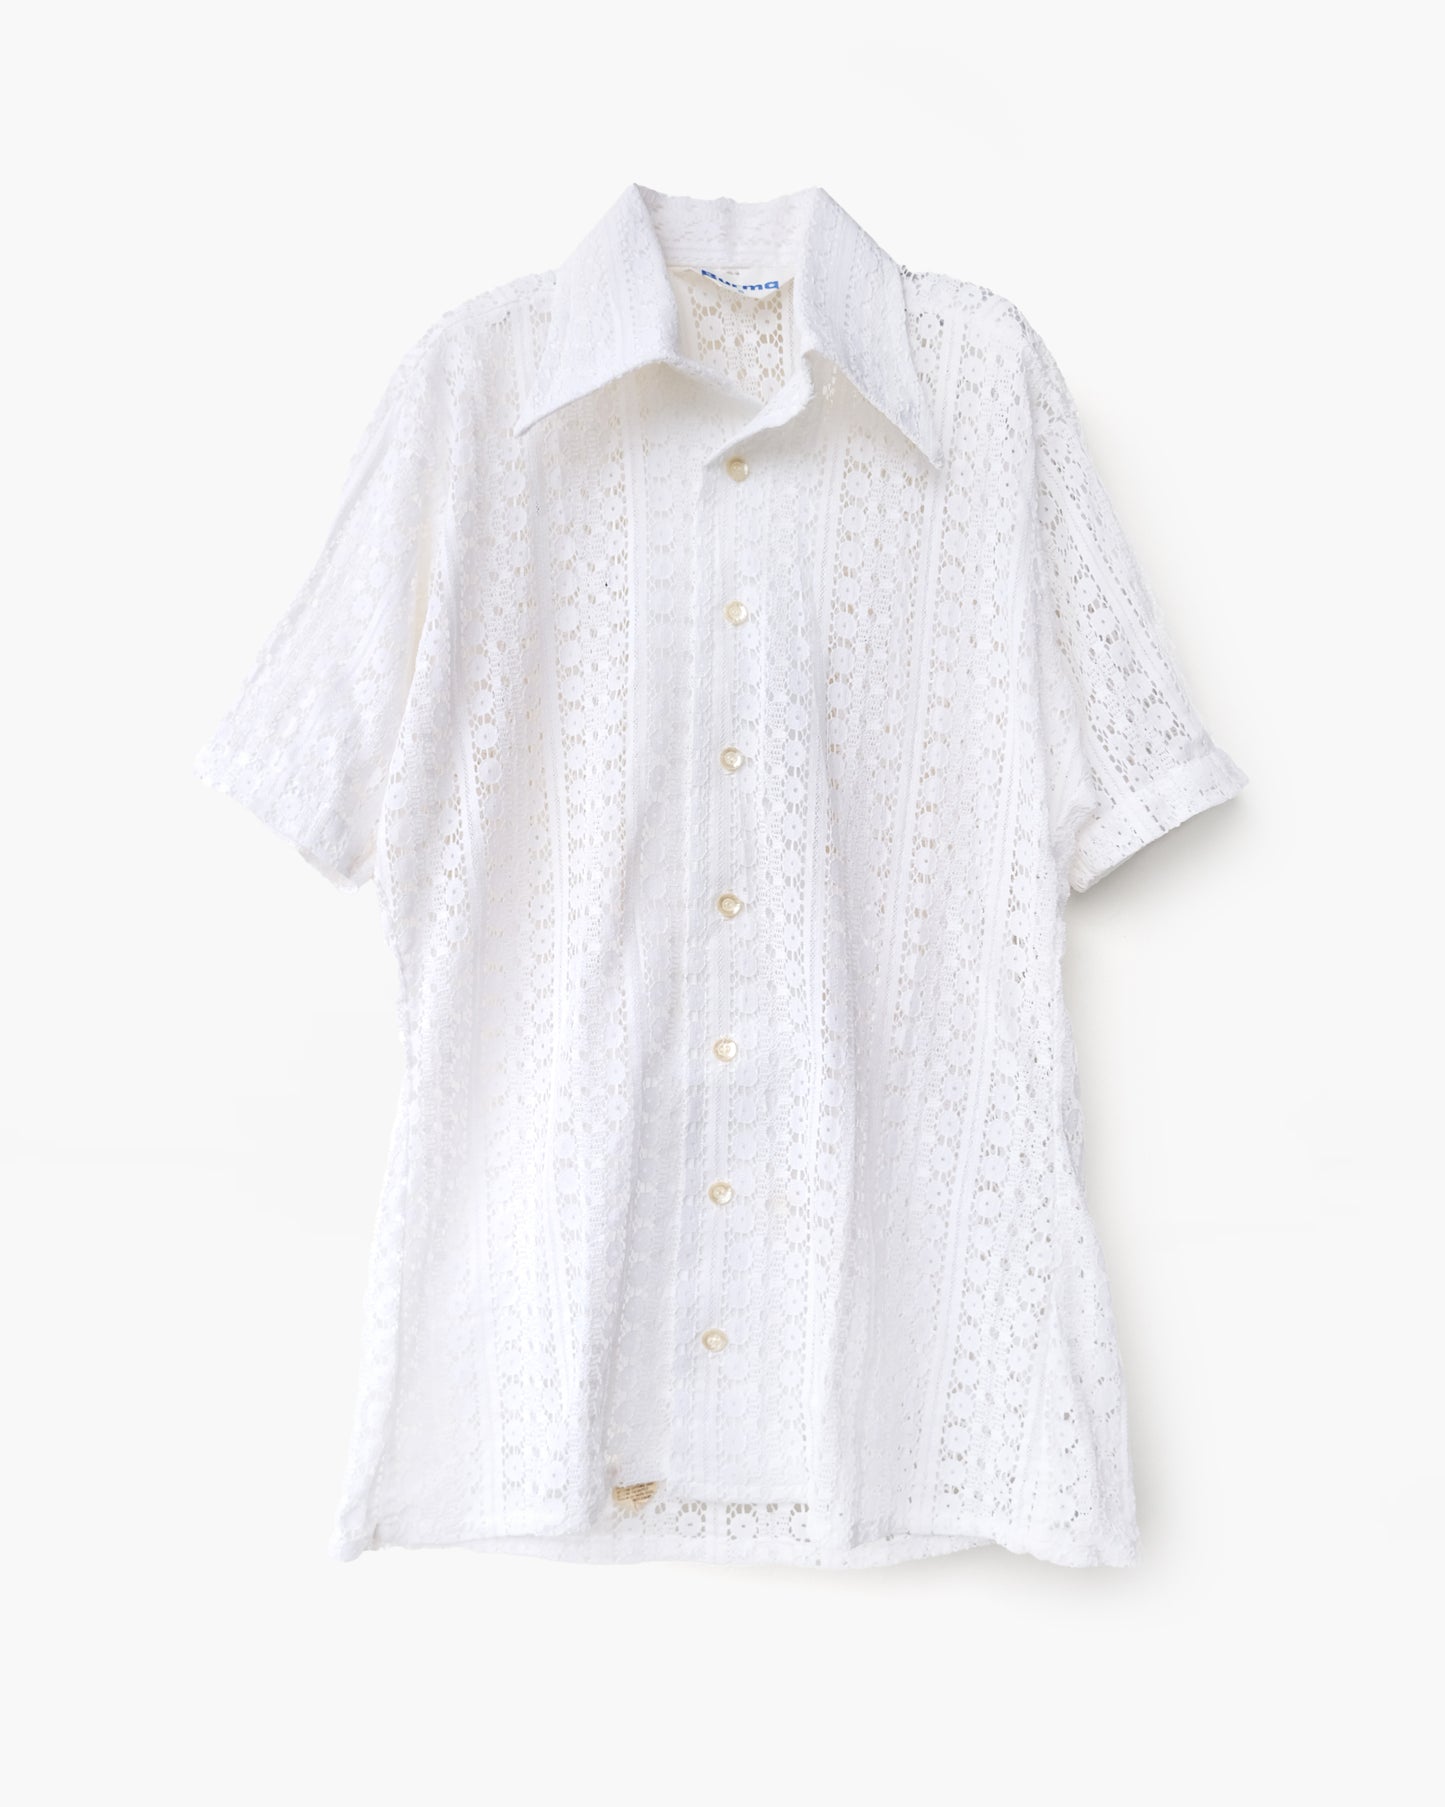 70's White Lace S/S Shirt